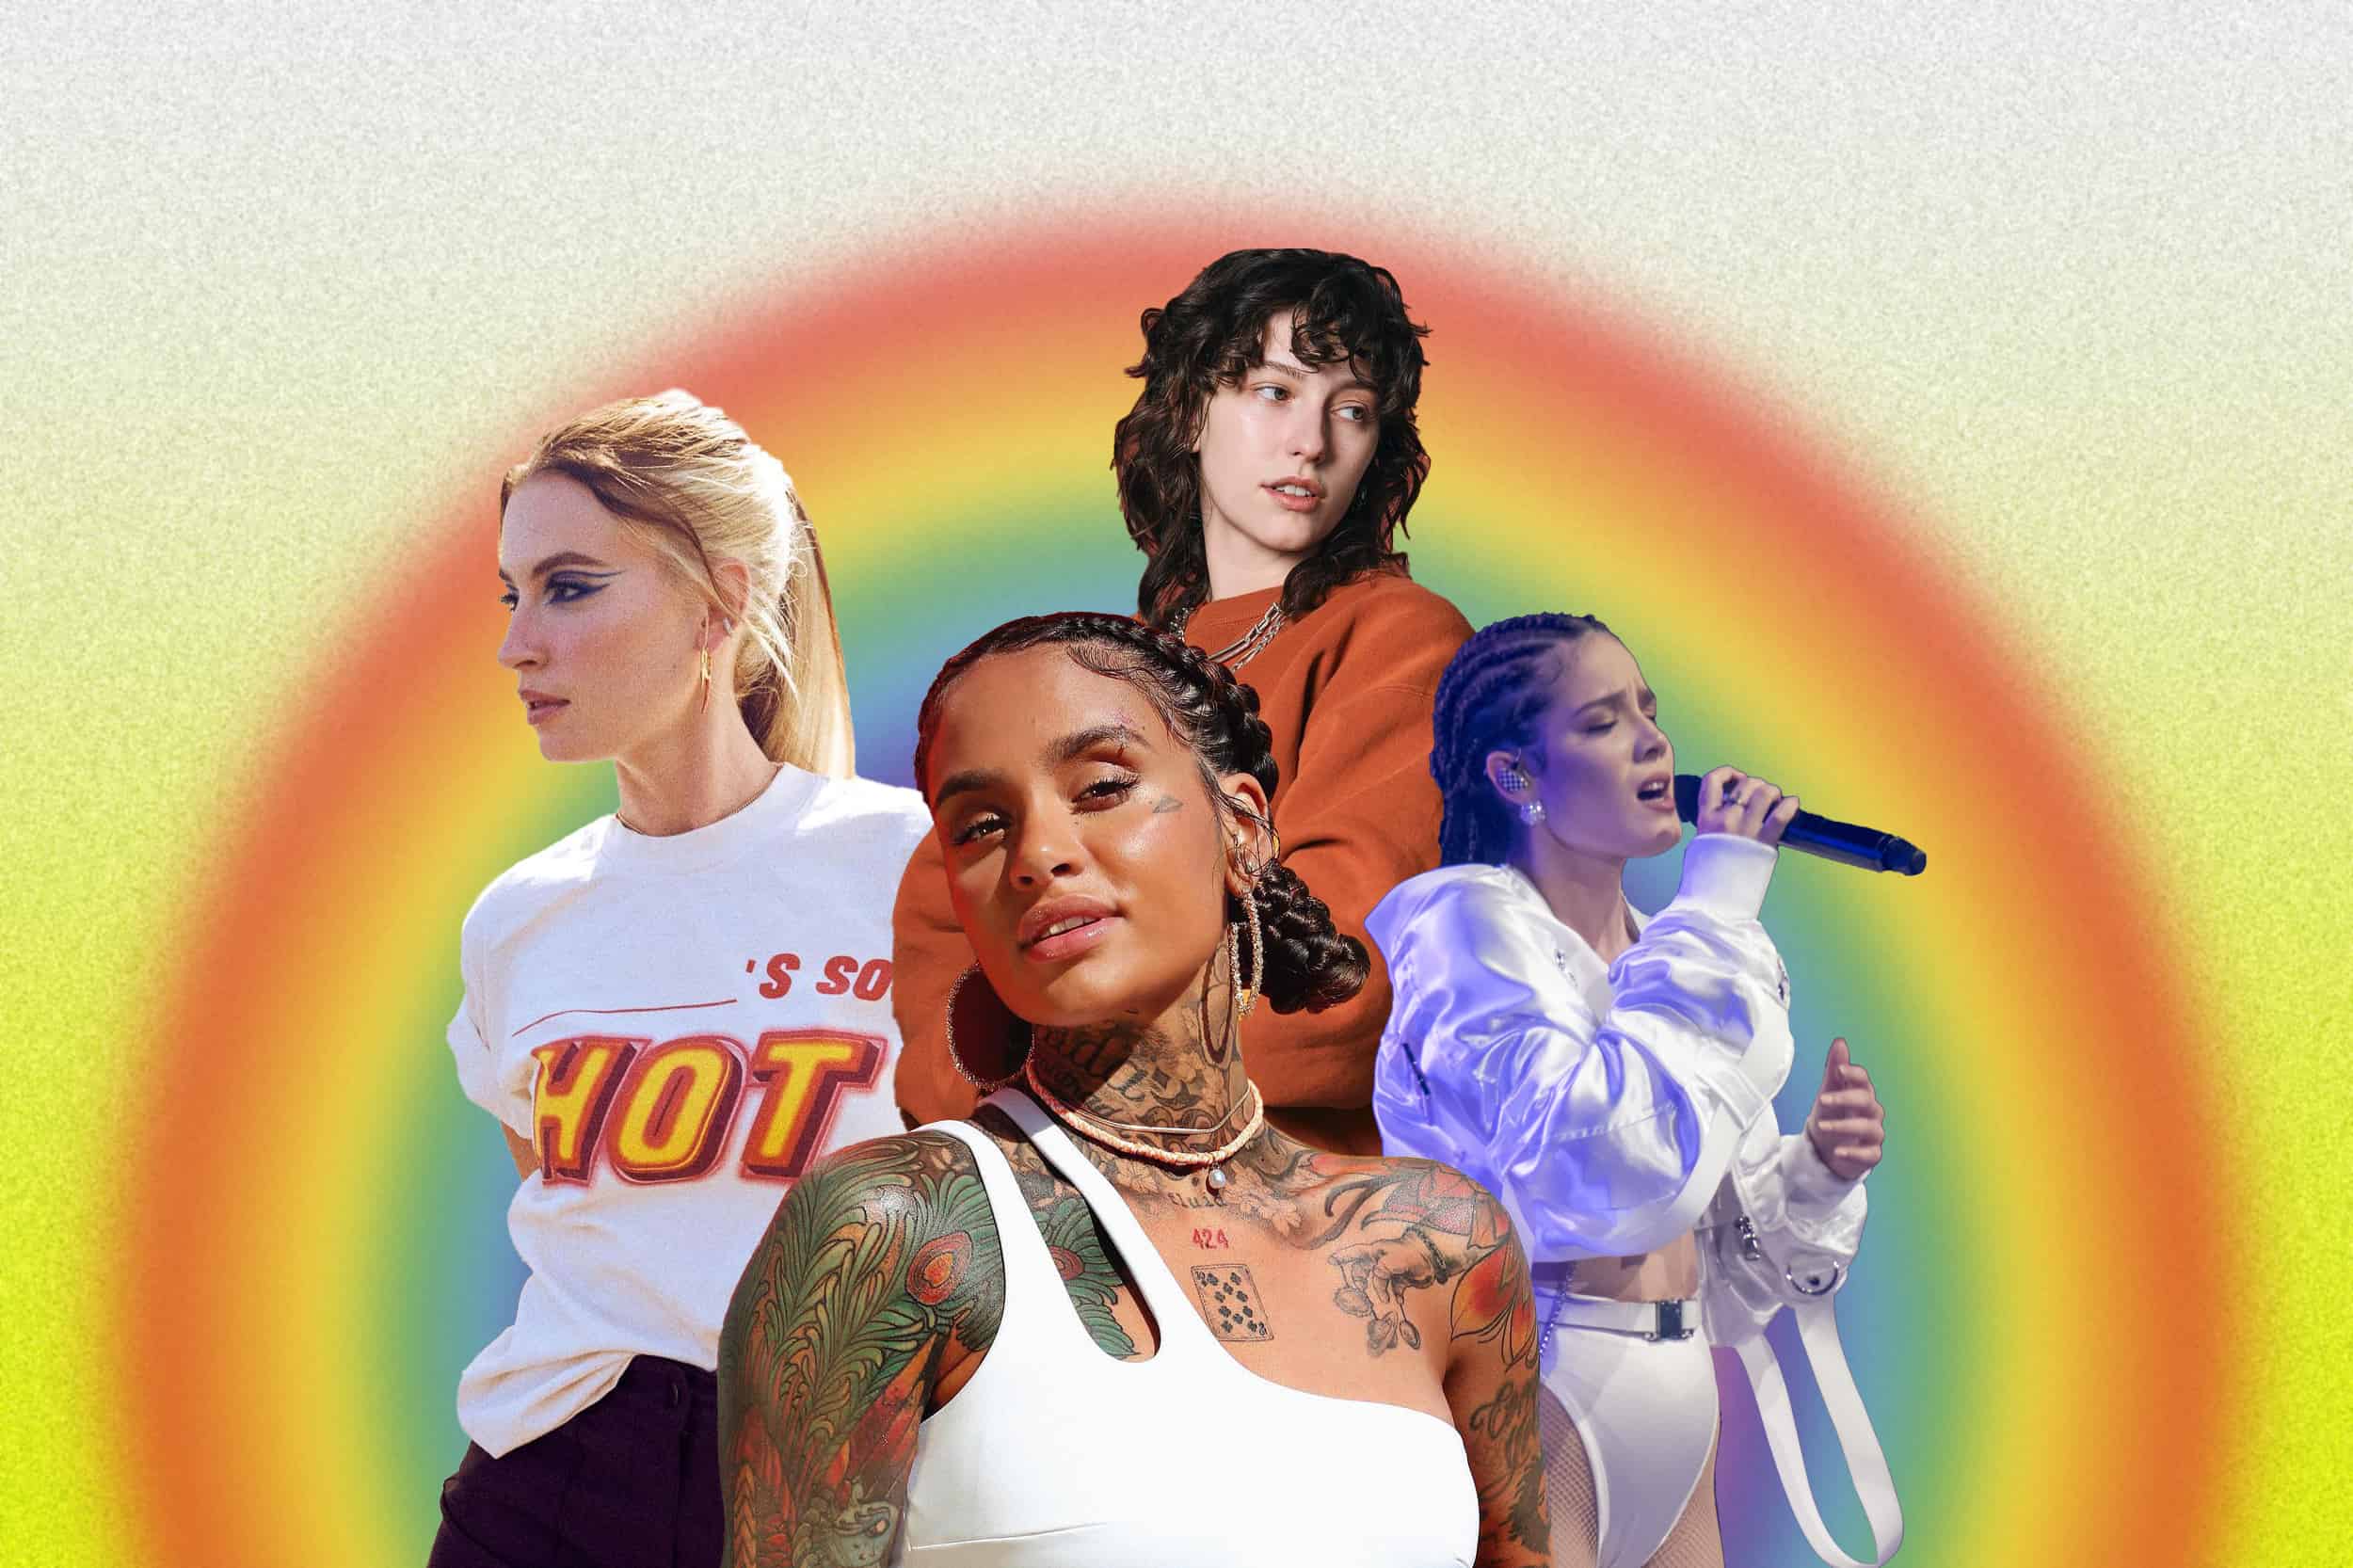 20 Talented Queer / Lesbian Singers